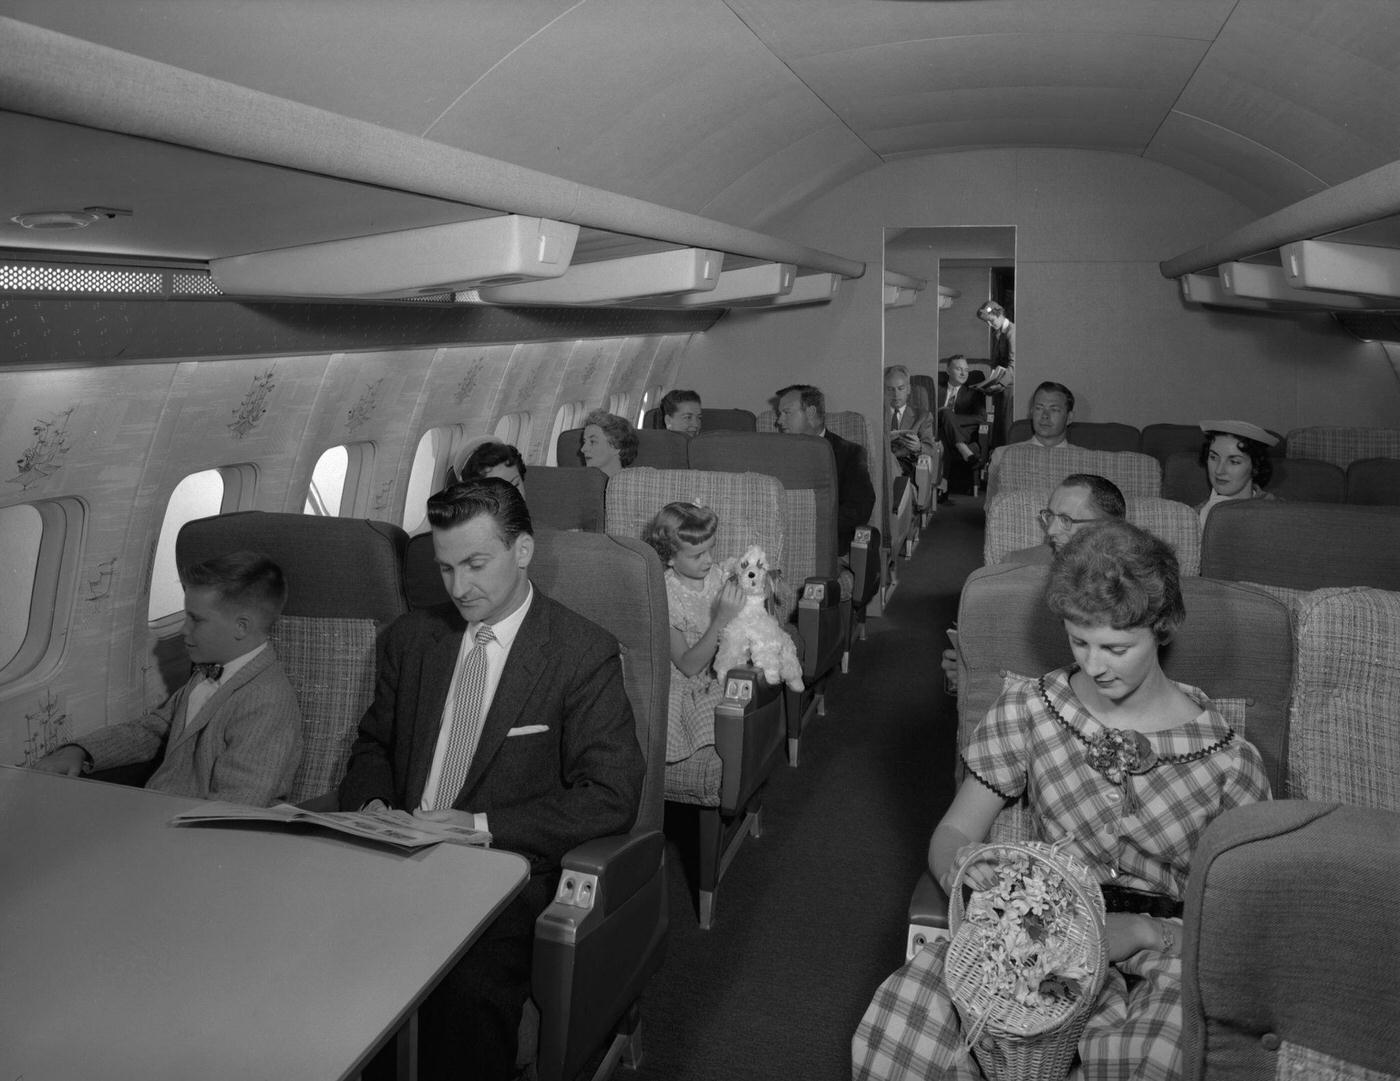 Passengers on a Transocean Air lines Boeing 377 Stratocruiser in the mid-1950s. Transocean Air lines was a pioneer discount airline that flew between 1946 and 1962.